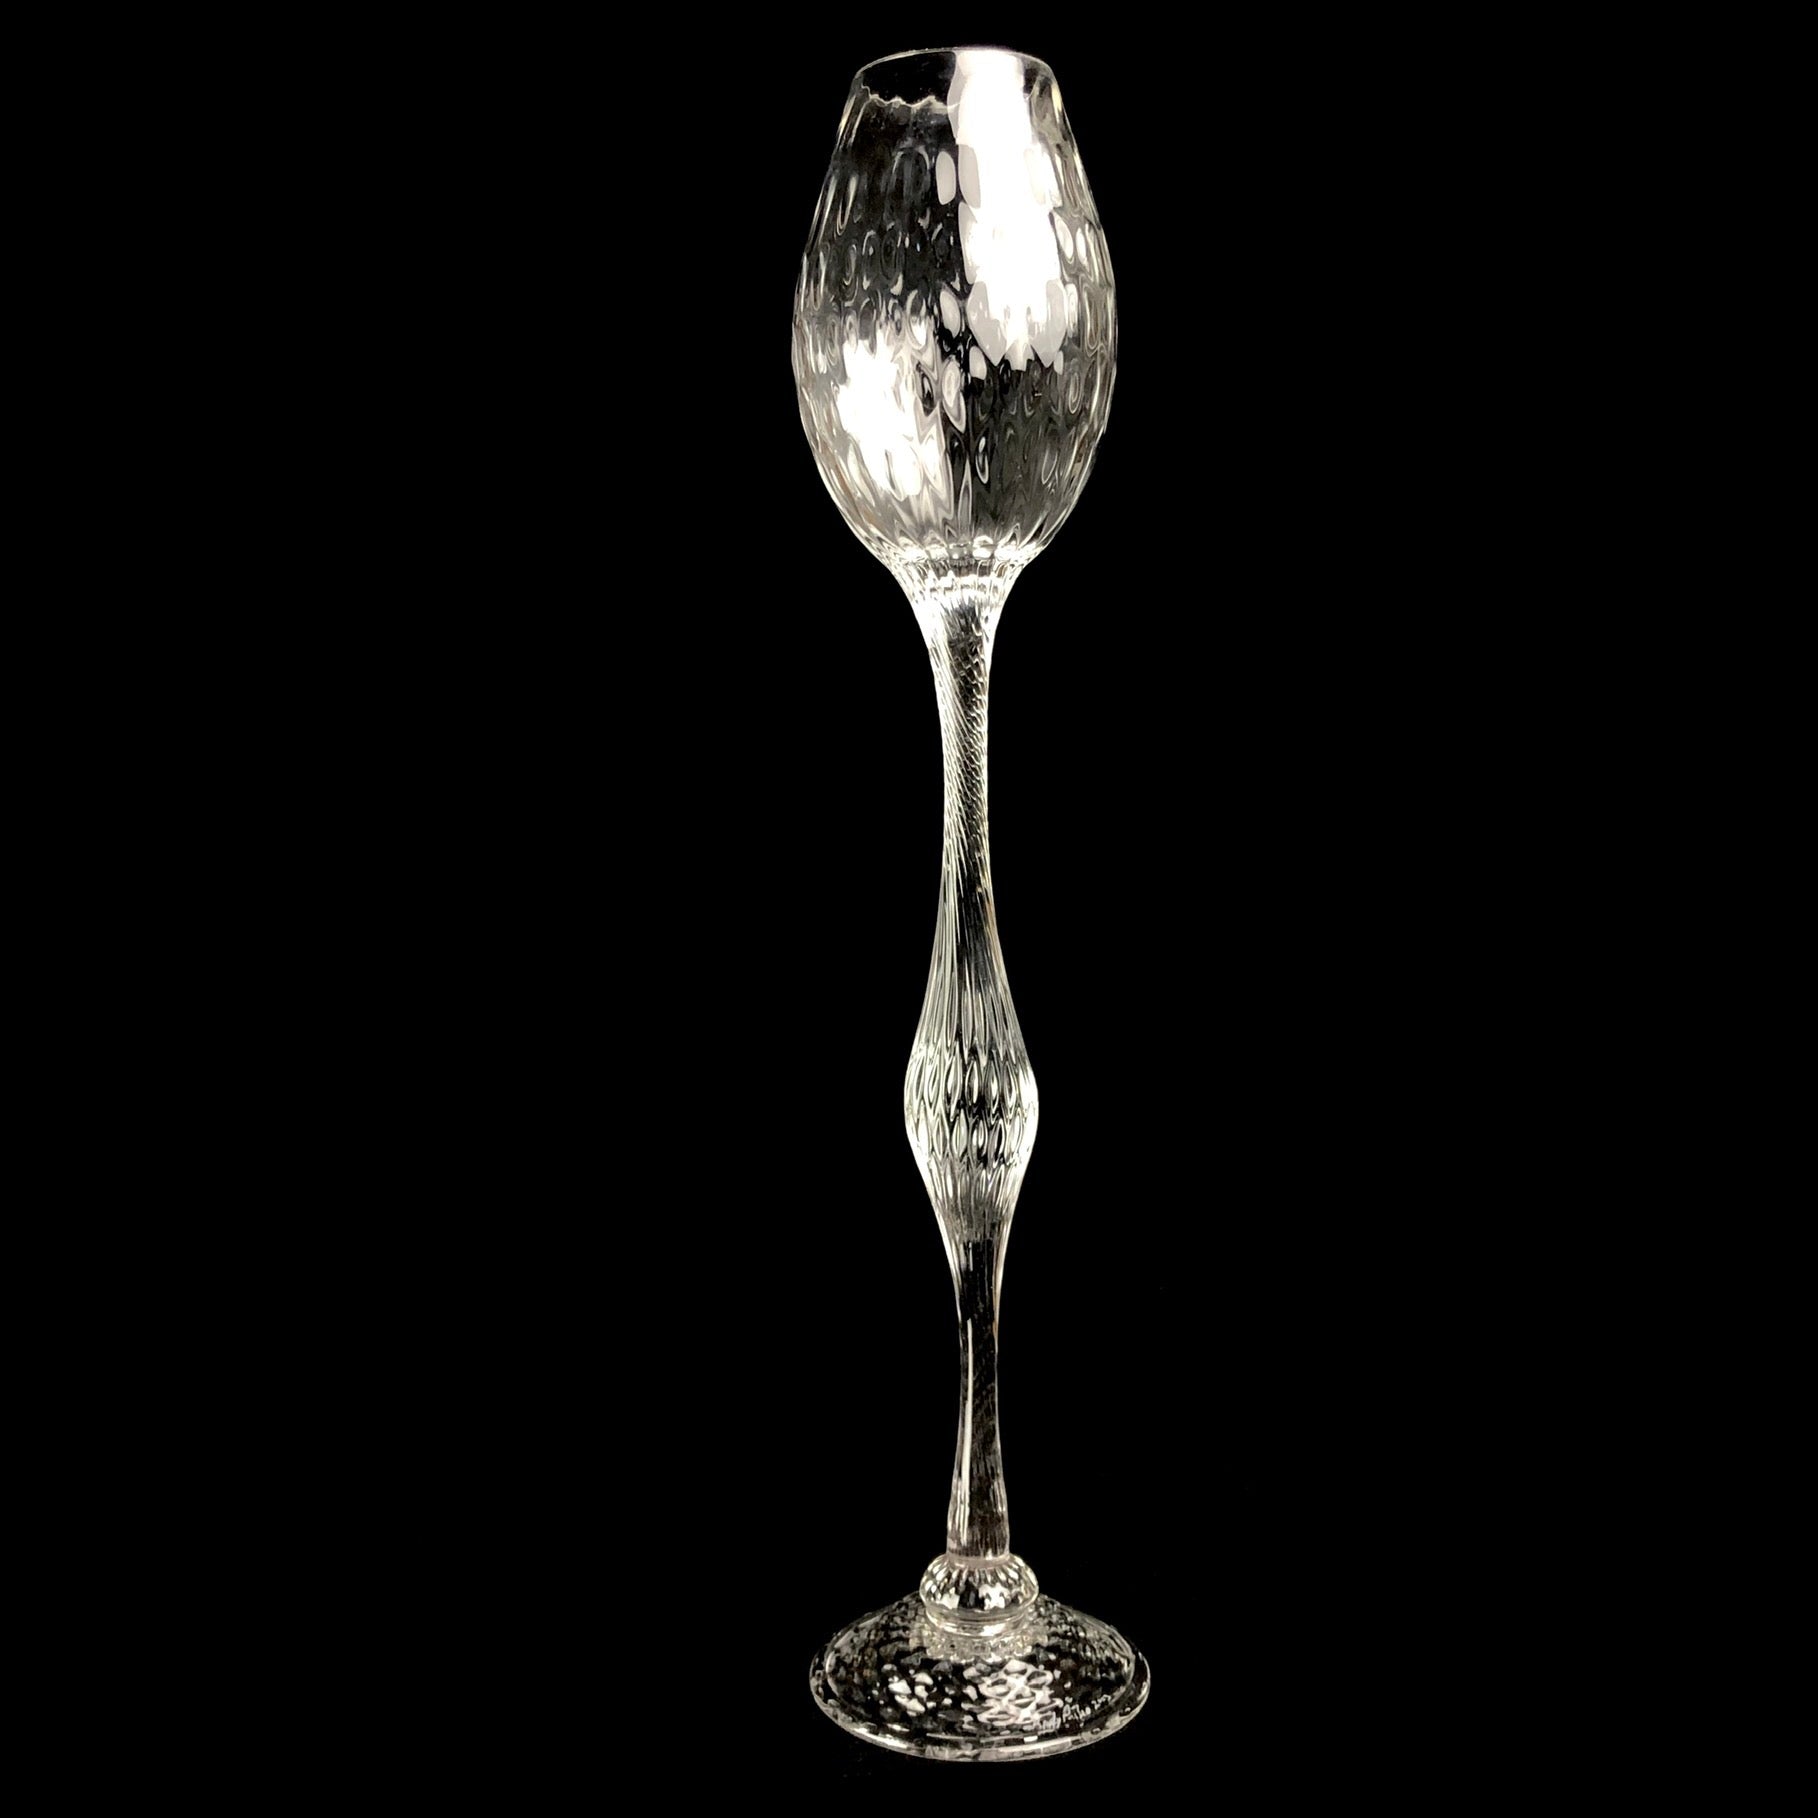 Clear glass goblet with intricate ribbed surface design